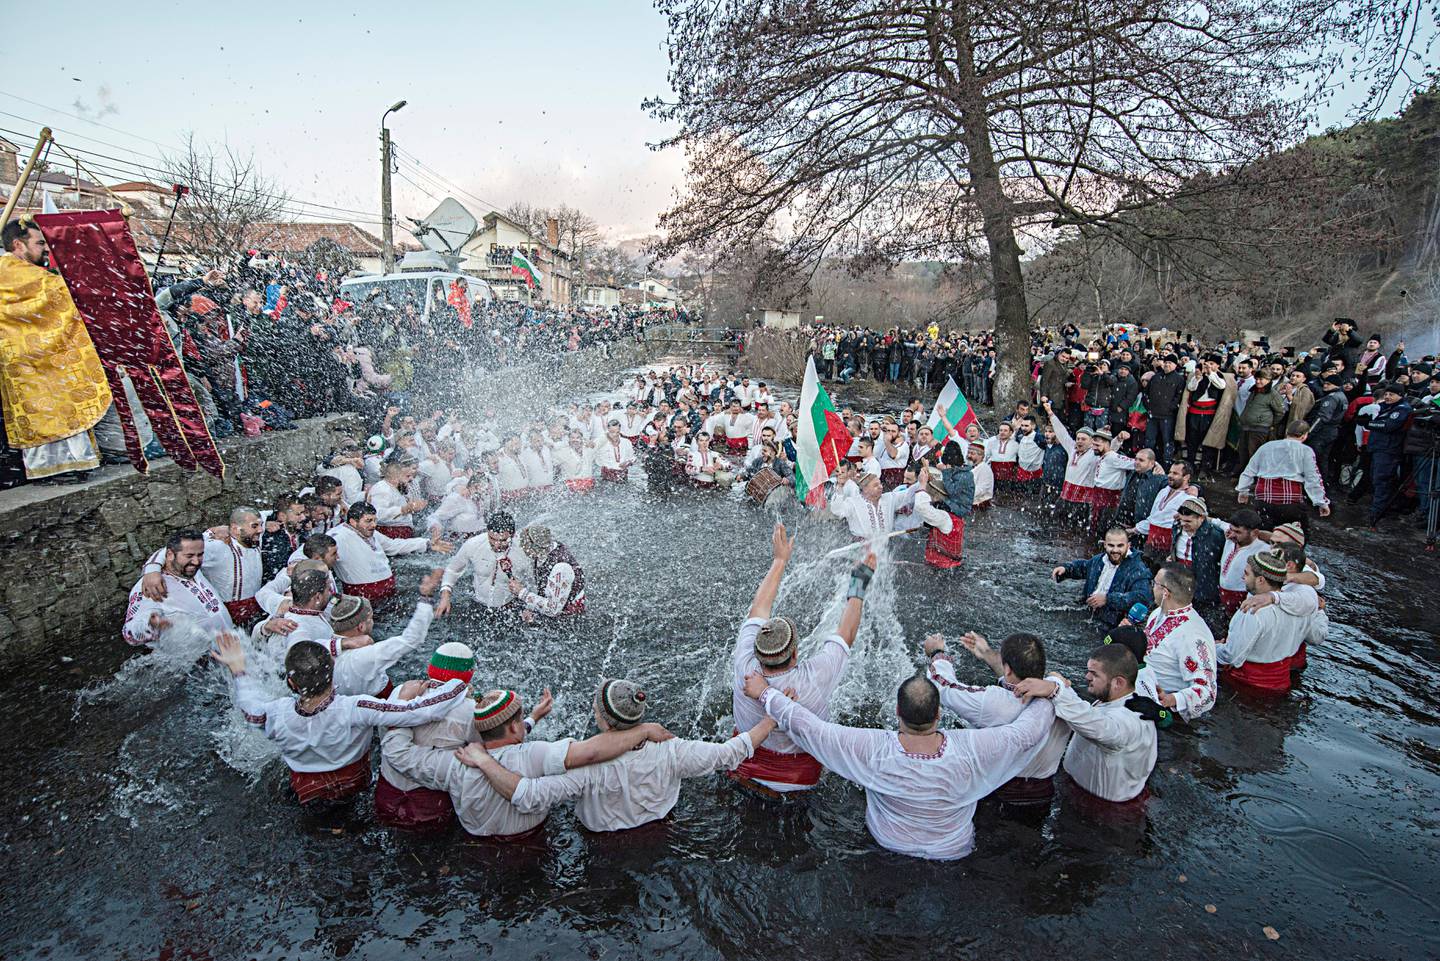 Bulgarians sing and chain dance in the icy waters of the Tundzha river during Epiphany, in Kalofer, Bulgaria, Monday, Jan. 6, 2020. Thousands of Orthodox Christian worshippers plunged into the icy waters of rivers and lakes across Bulgaria on Monday to retrieve crucifixes tossed by priests in ceremonies commemorating the baptism of Jesus Christ. In the mountain city of Kalofer, in central Bulgaria, dozens of men dressed in white embroidered shirts waded into the frigid Tundzha River waving national flags and singing folk songs. (AP Photo)